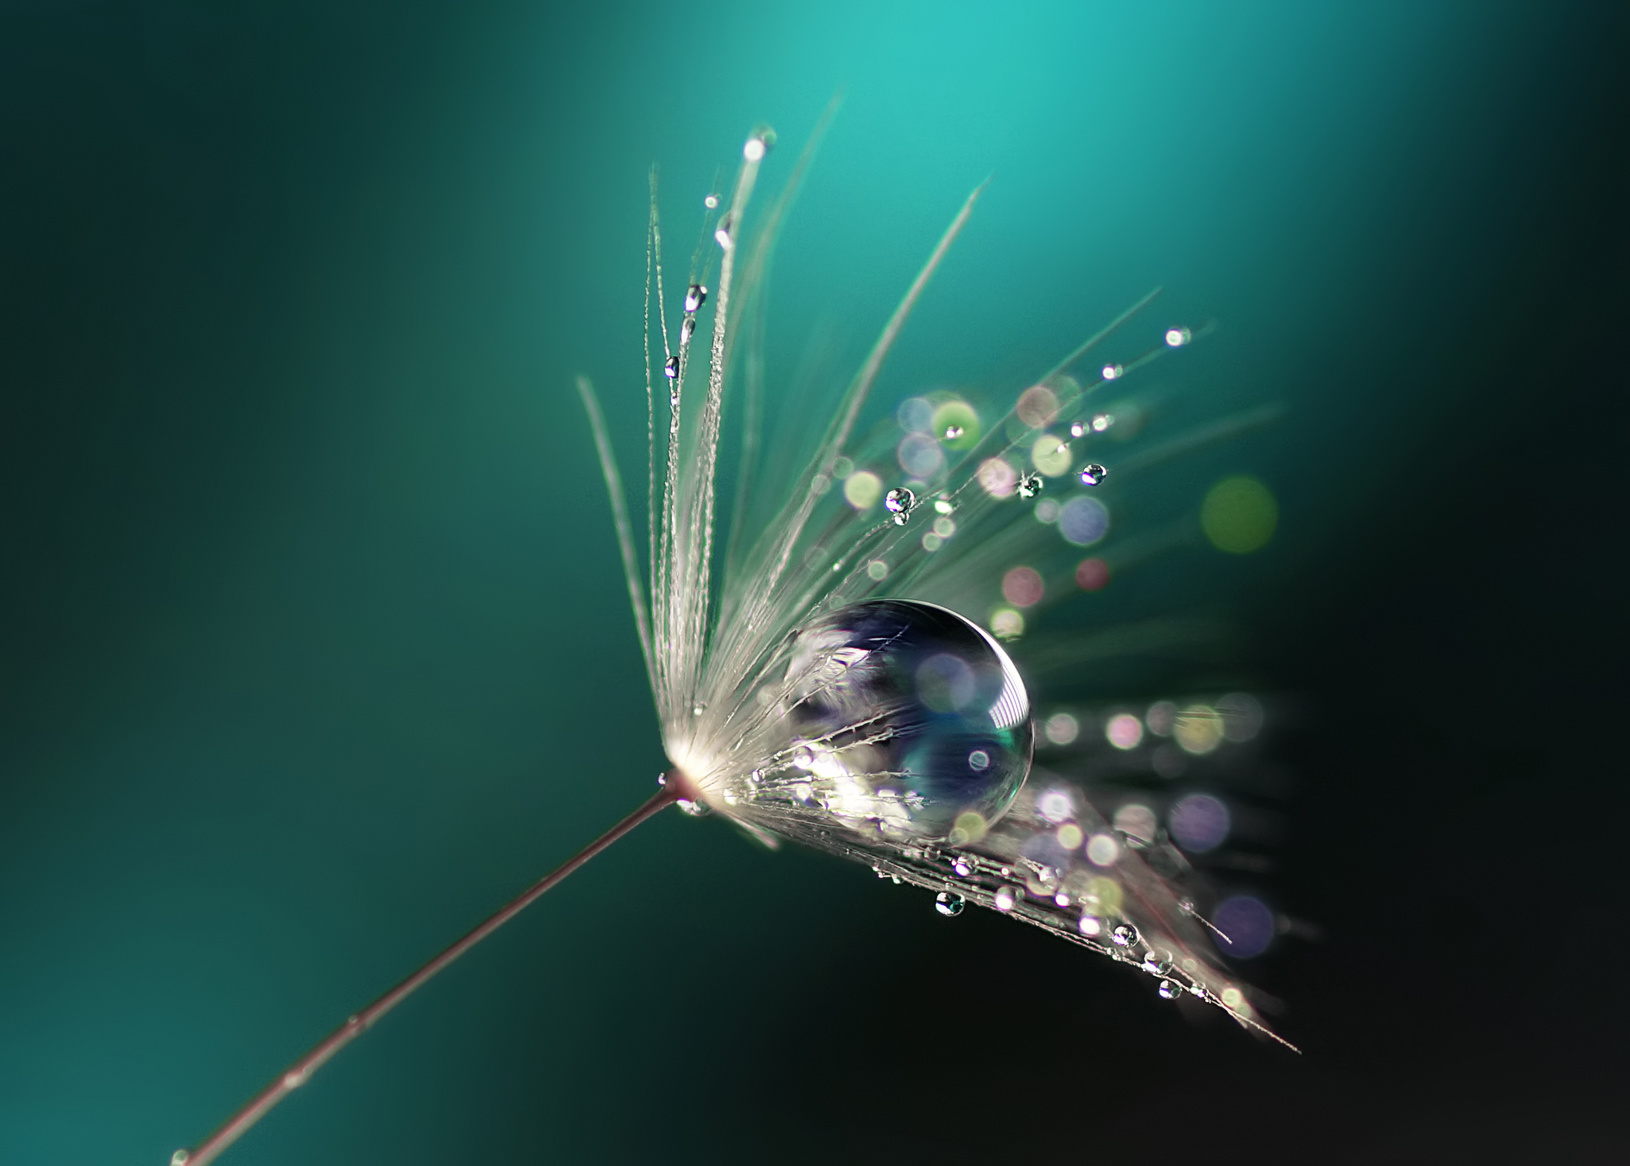 Beautiful shiny dew drops on a dandelion seed. Close-up. Sparkling bokeh. Beautiful blue background.